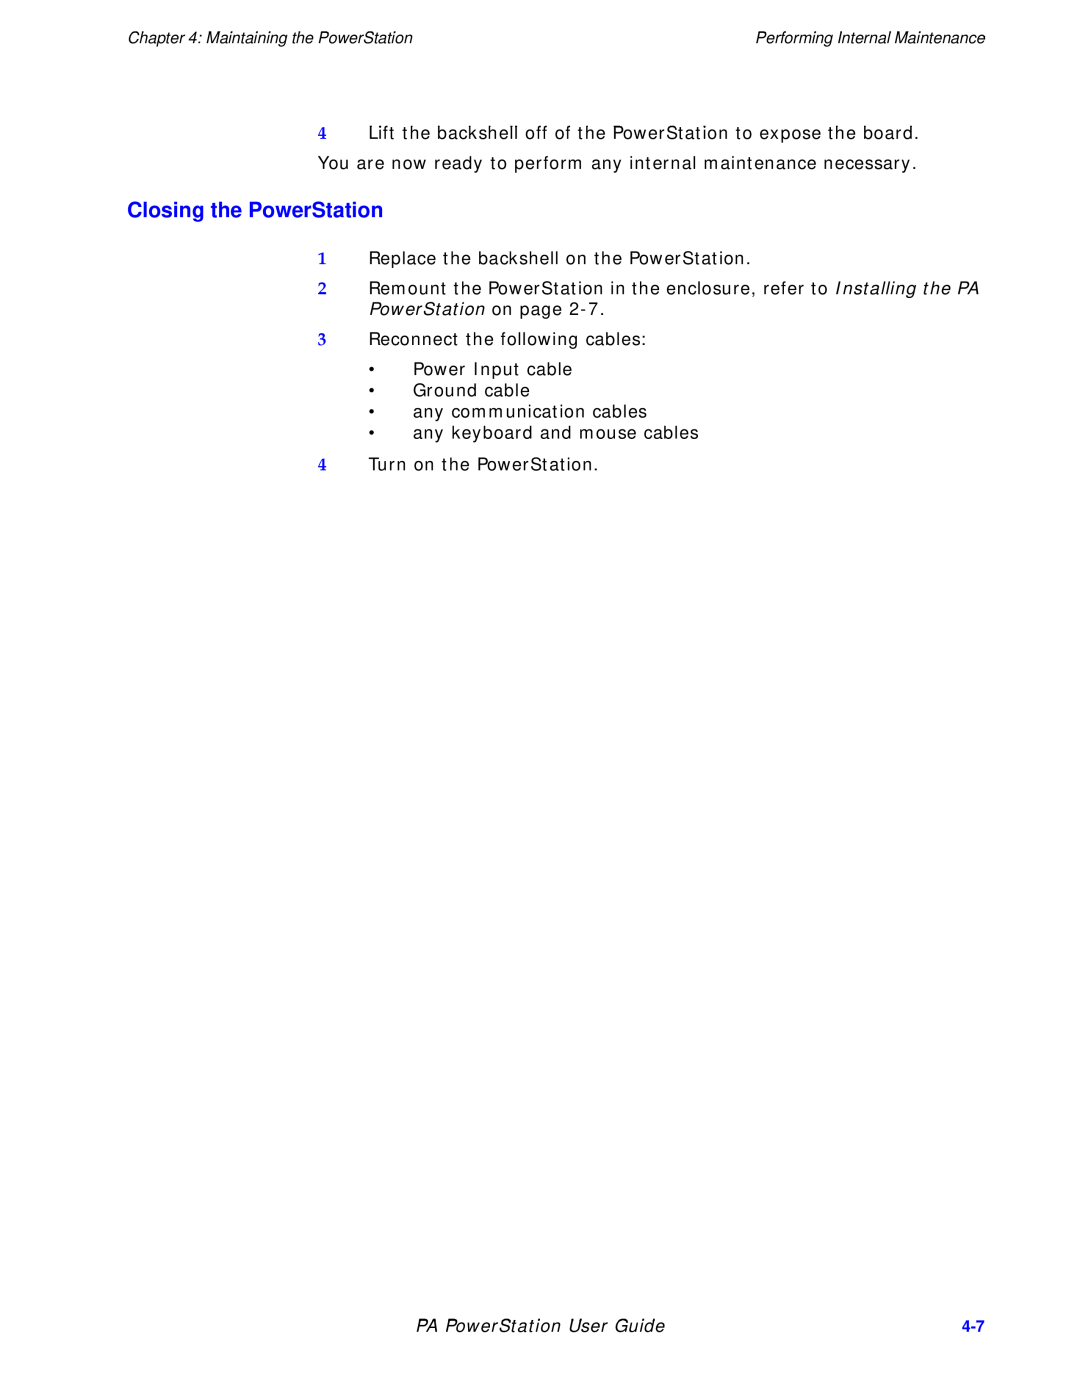 Parker Hannifin PA Series manual Closing the PowerStation, PA PowerStation User Guide 